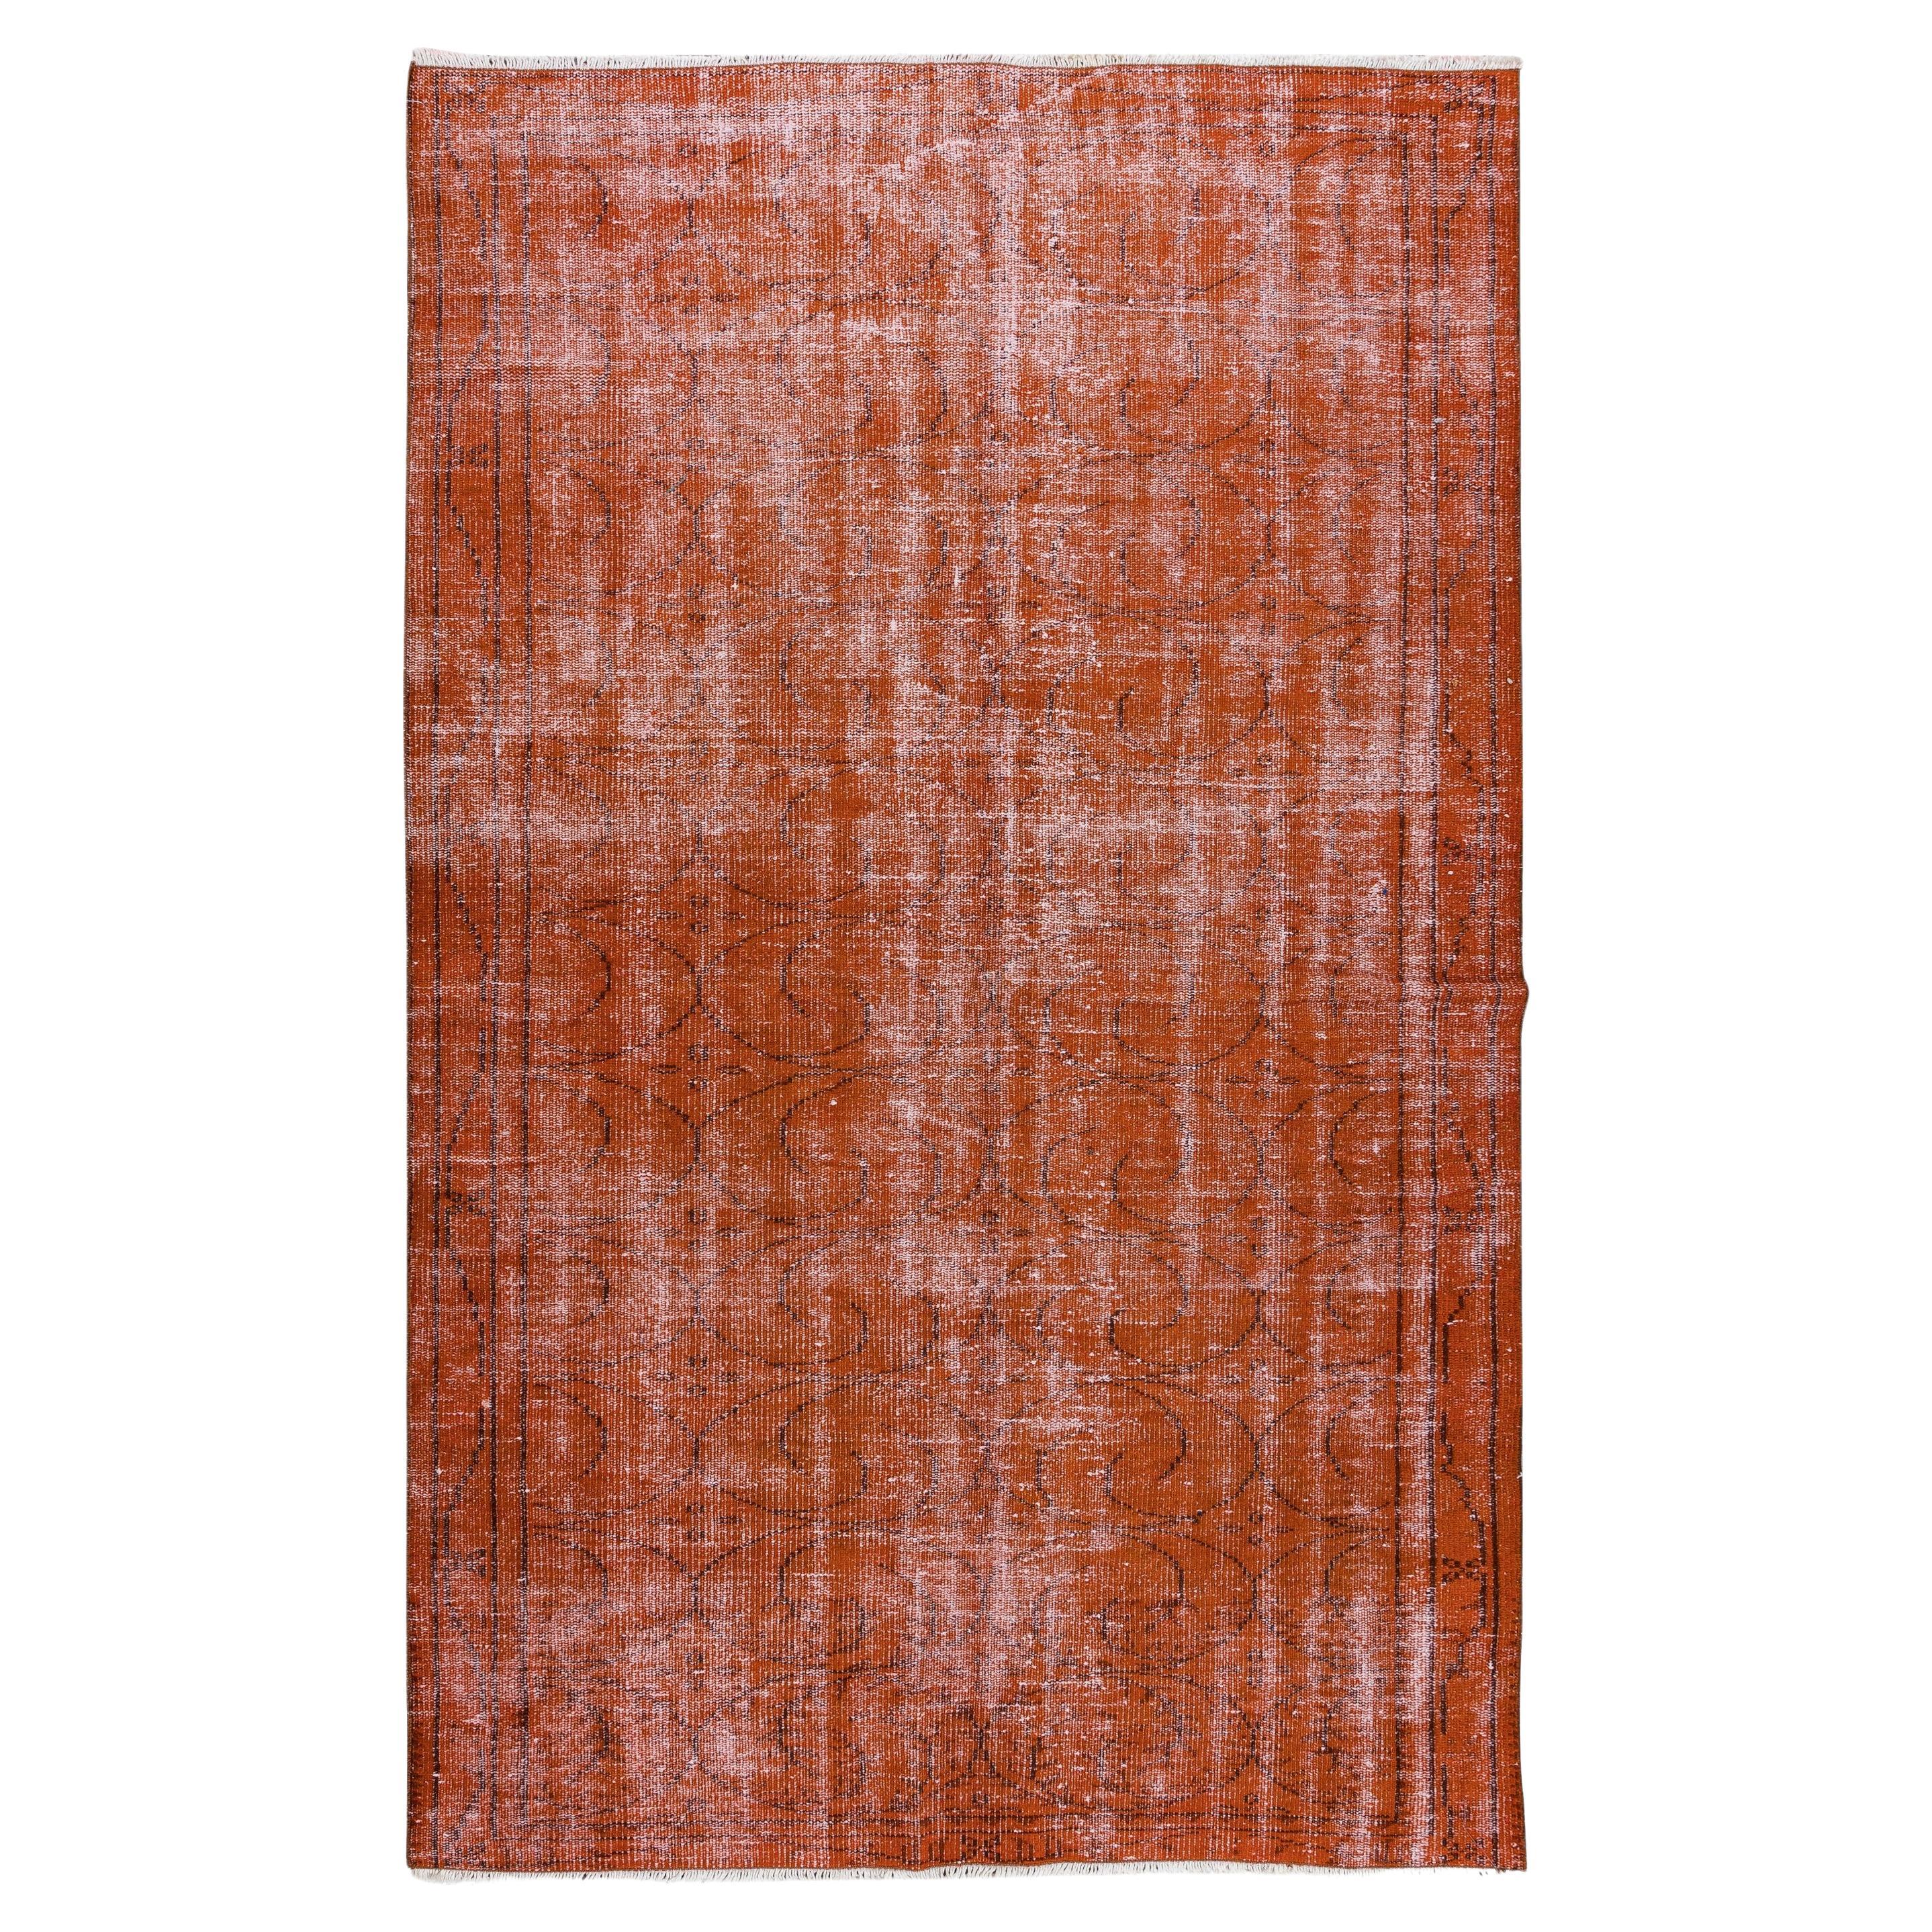 5x8 Ft Hand Knotted Turkish Rug Over-Dyed in Orange for Contemporary Interiors